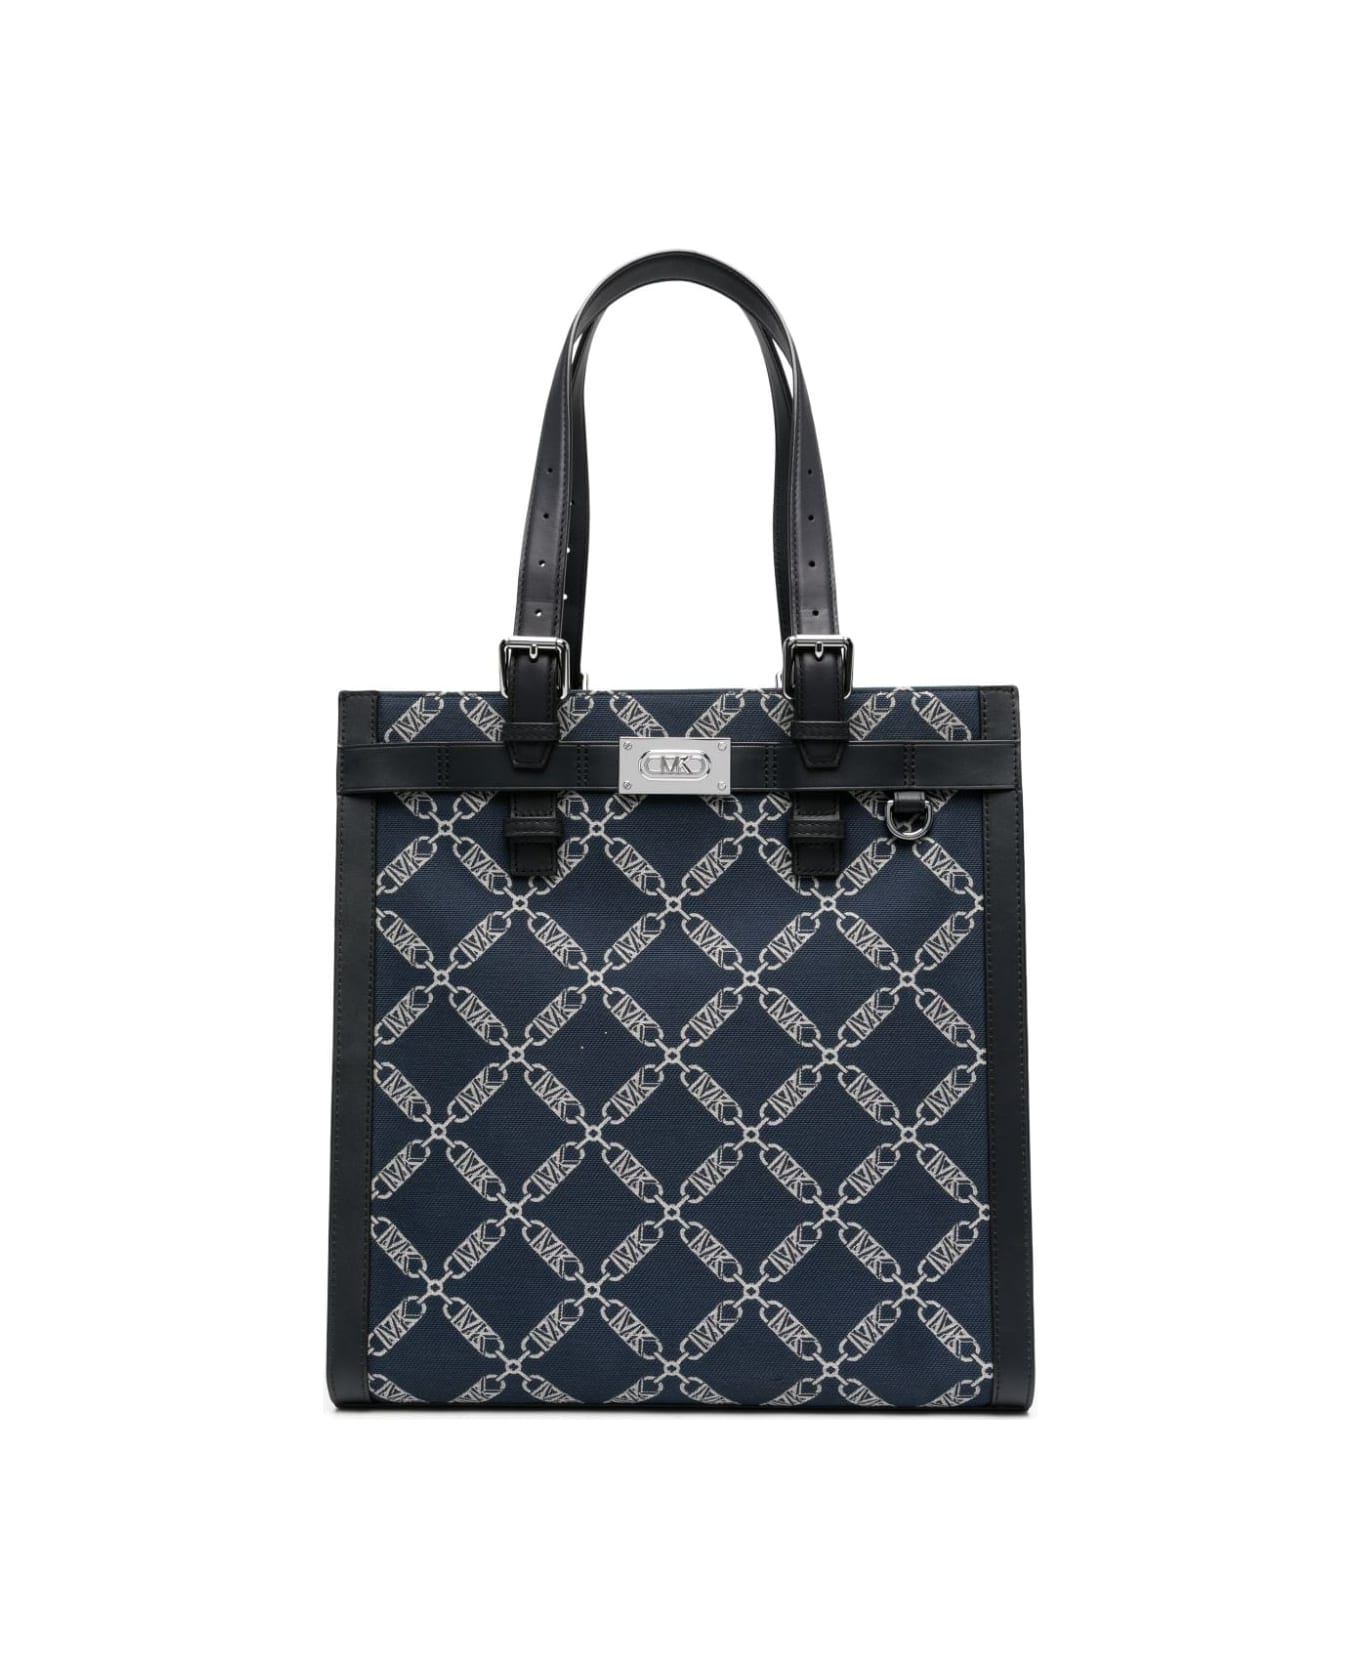 Michael Kors Ns Structured Tote - Navy